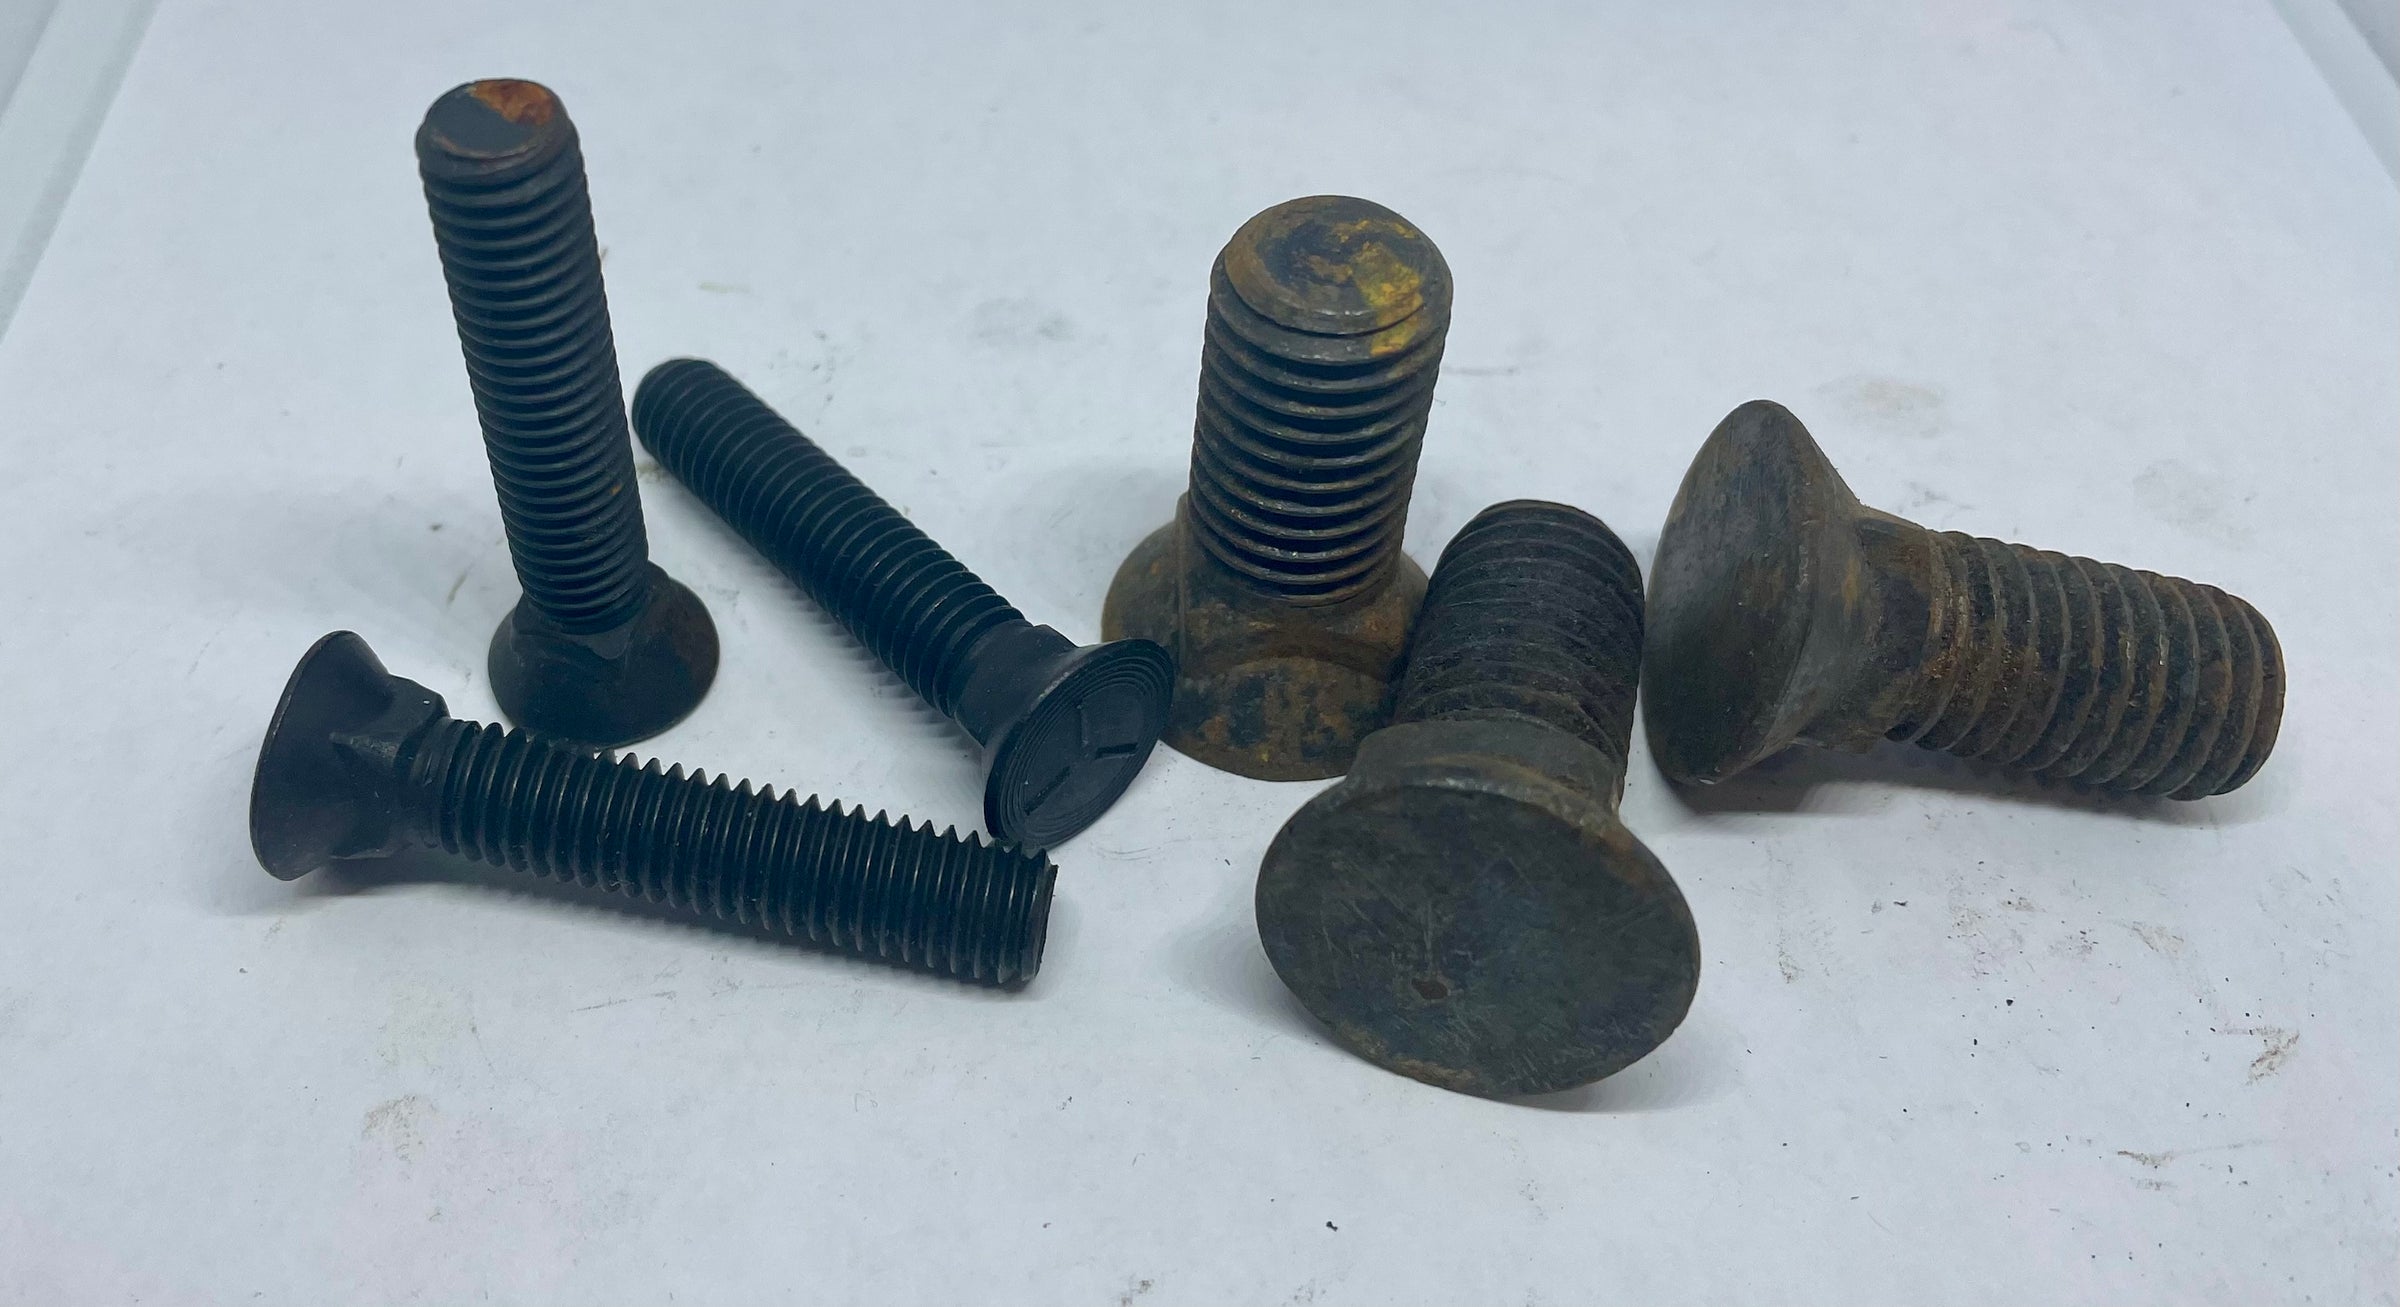 Plow Bolts